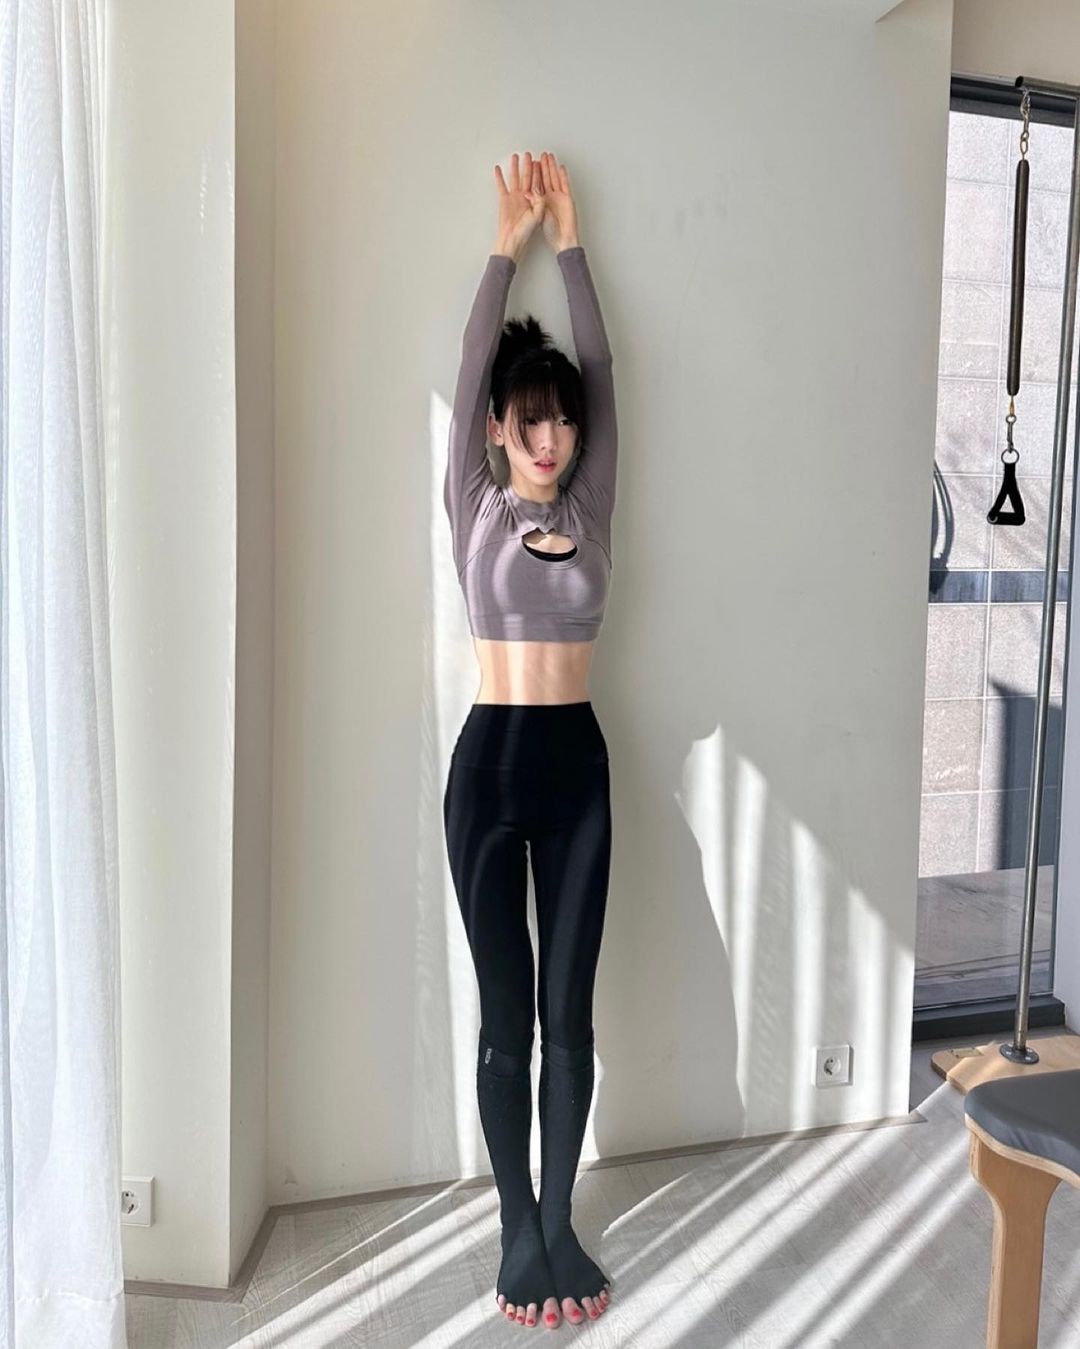 Taeyeon, small and skinny body with 11 abs... diet inspiration